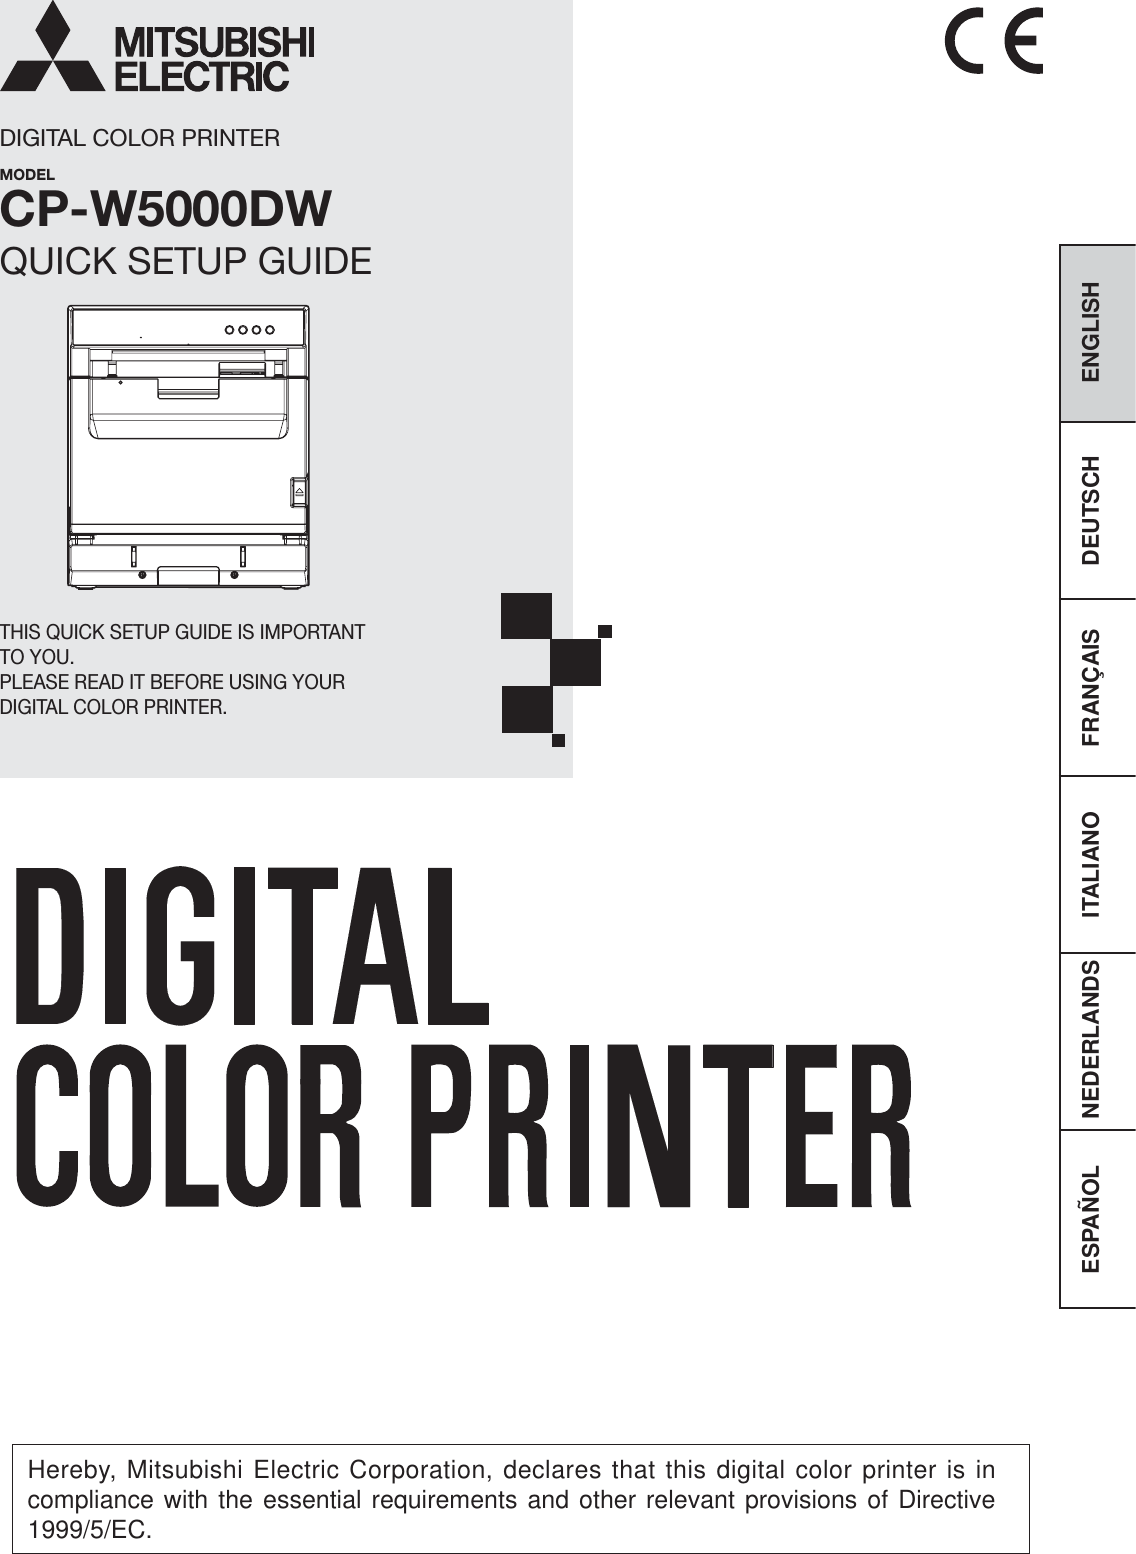 FRANÇAIS ENGLISHDEUTSCHITALIANONEDERLANDSESPAÑOLDIGITAL COLOR PRINTERMODELCP-W5000DWQUICK SETUP GUIDETHIS QUICK SETUP GUIDE IS IMPORTANT TO YOU.PLEASE READ IT BEFORE USING YOUR DIGITAL COLOR PRINTER.Hereby, Mitsubishi Electric Corporation, declares that this digital color printer is in compliance with the essential requirements and other relevant provisions of Directive 1999/5/EC.